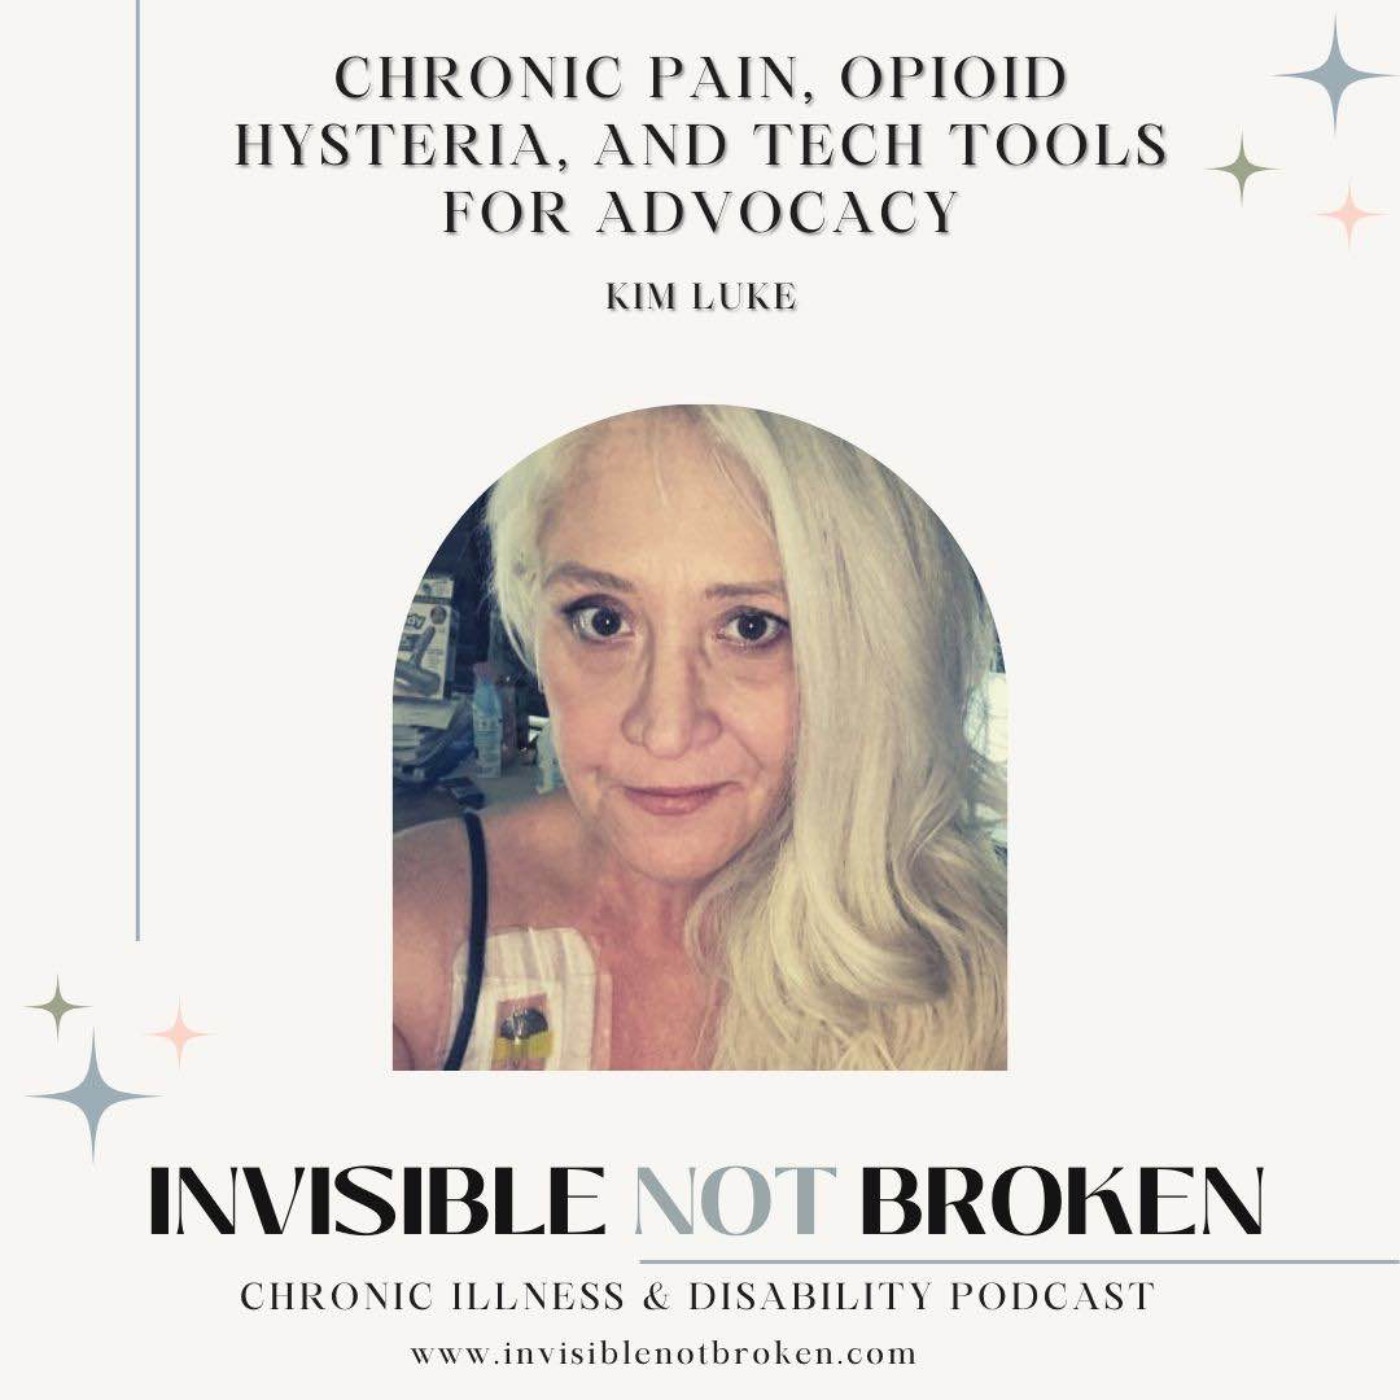 Chronic Pain, Opioid Hysteria, and Tech Tools for Advocacy: Kim Luke